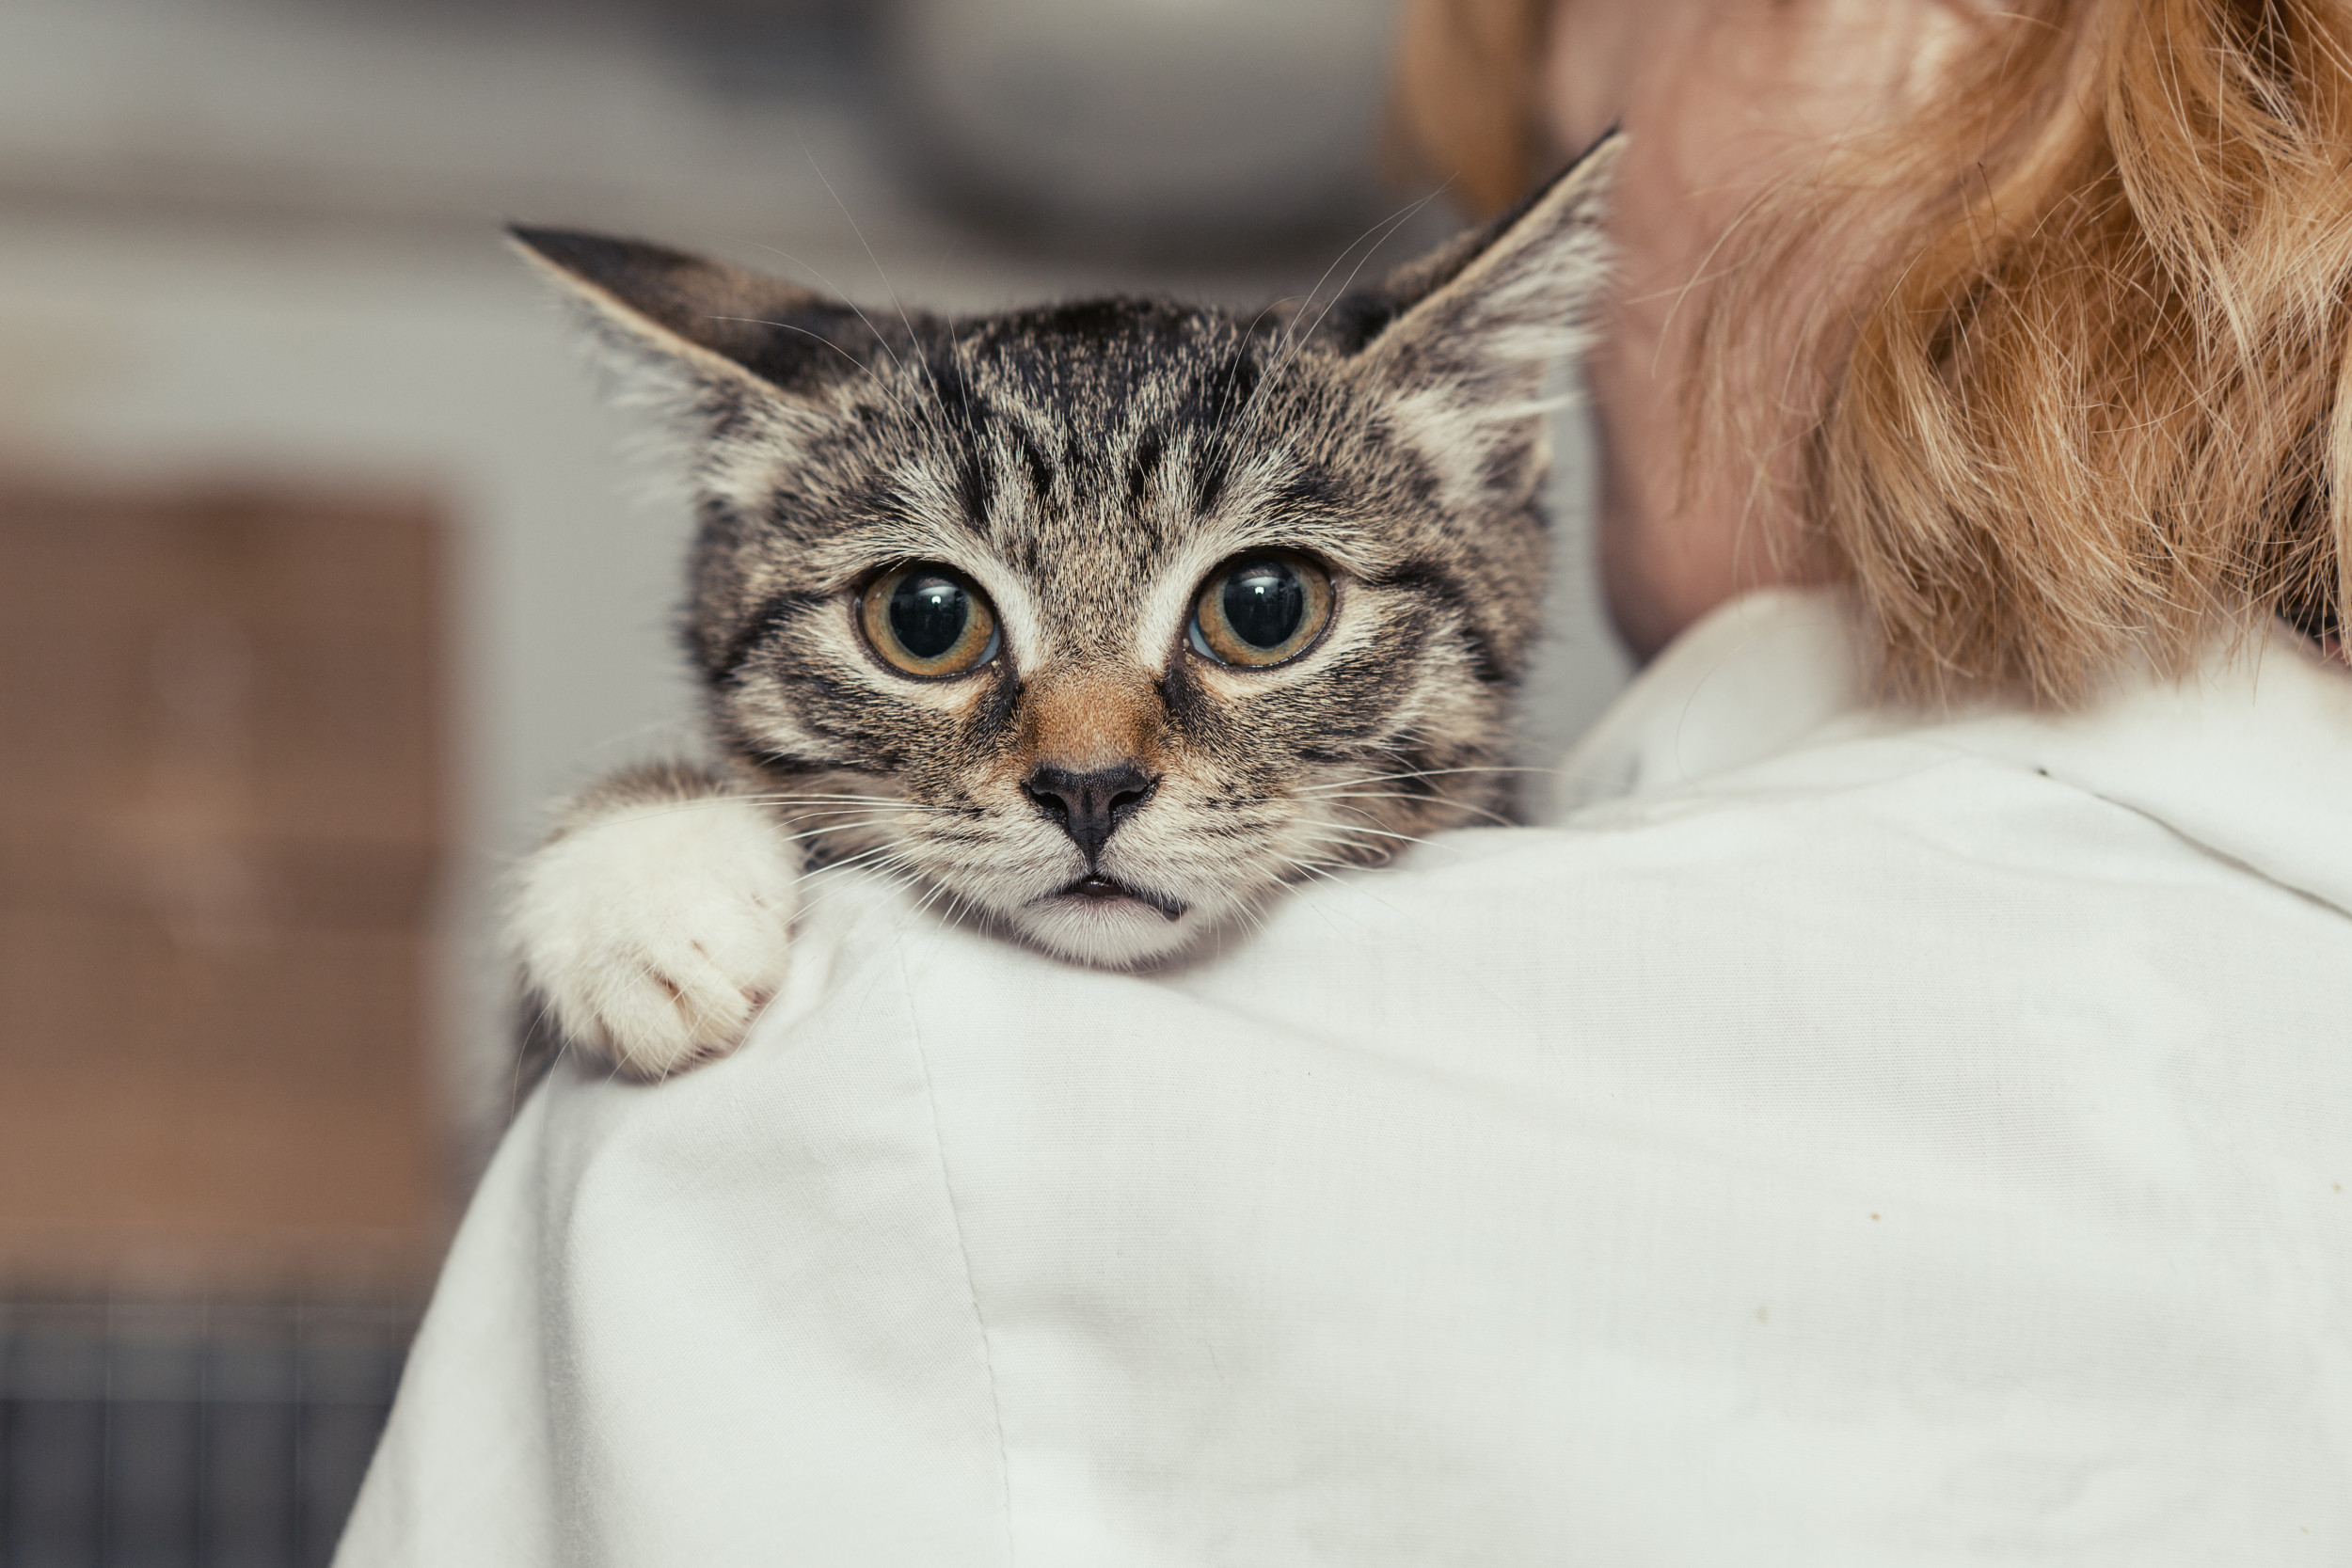 Common Kitty Behaviors And Tips For Changing Your Cat's Behavior